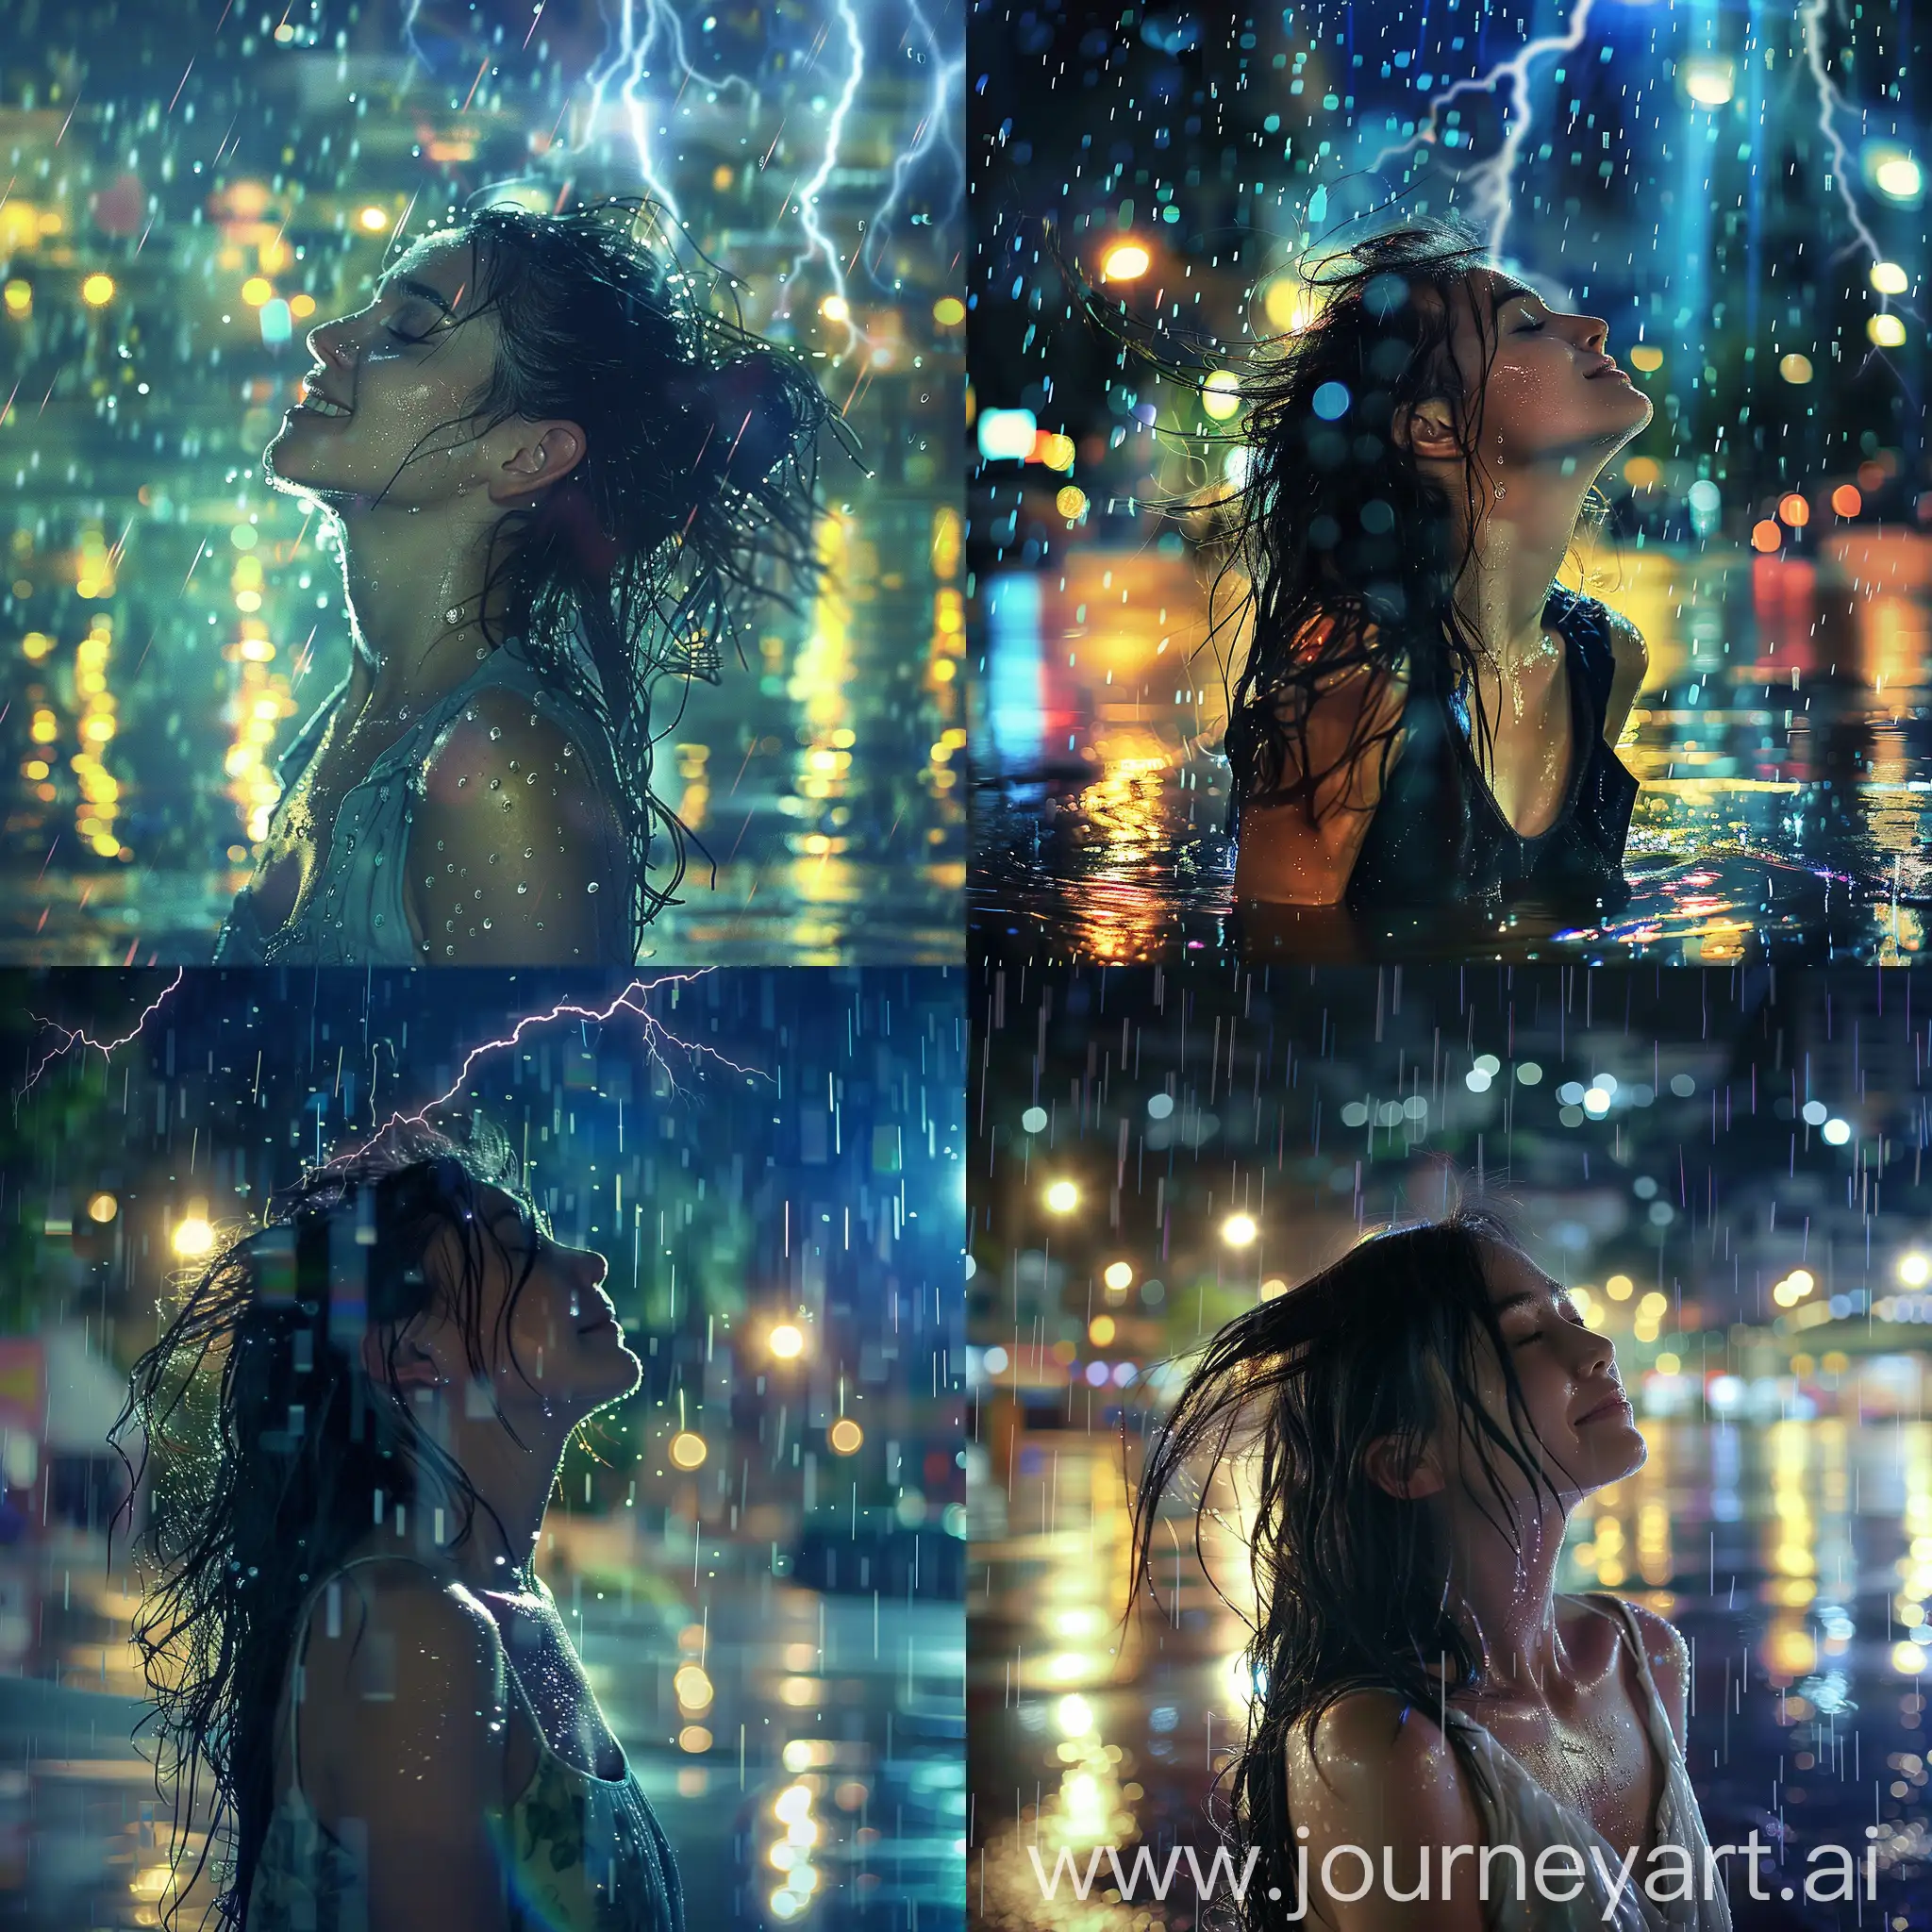 A woman, with a wet body and clothes, stands in the rain. Her hair clings to her face, droplets glistening. The city lights reflect on the wet pavement. She looks up, eyes closed, smiling softly as raindrops dance around her. The sky is dark, with flashes of lightning illuminating